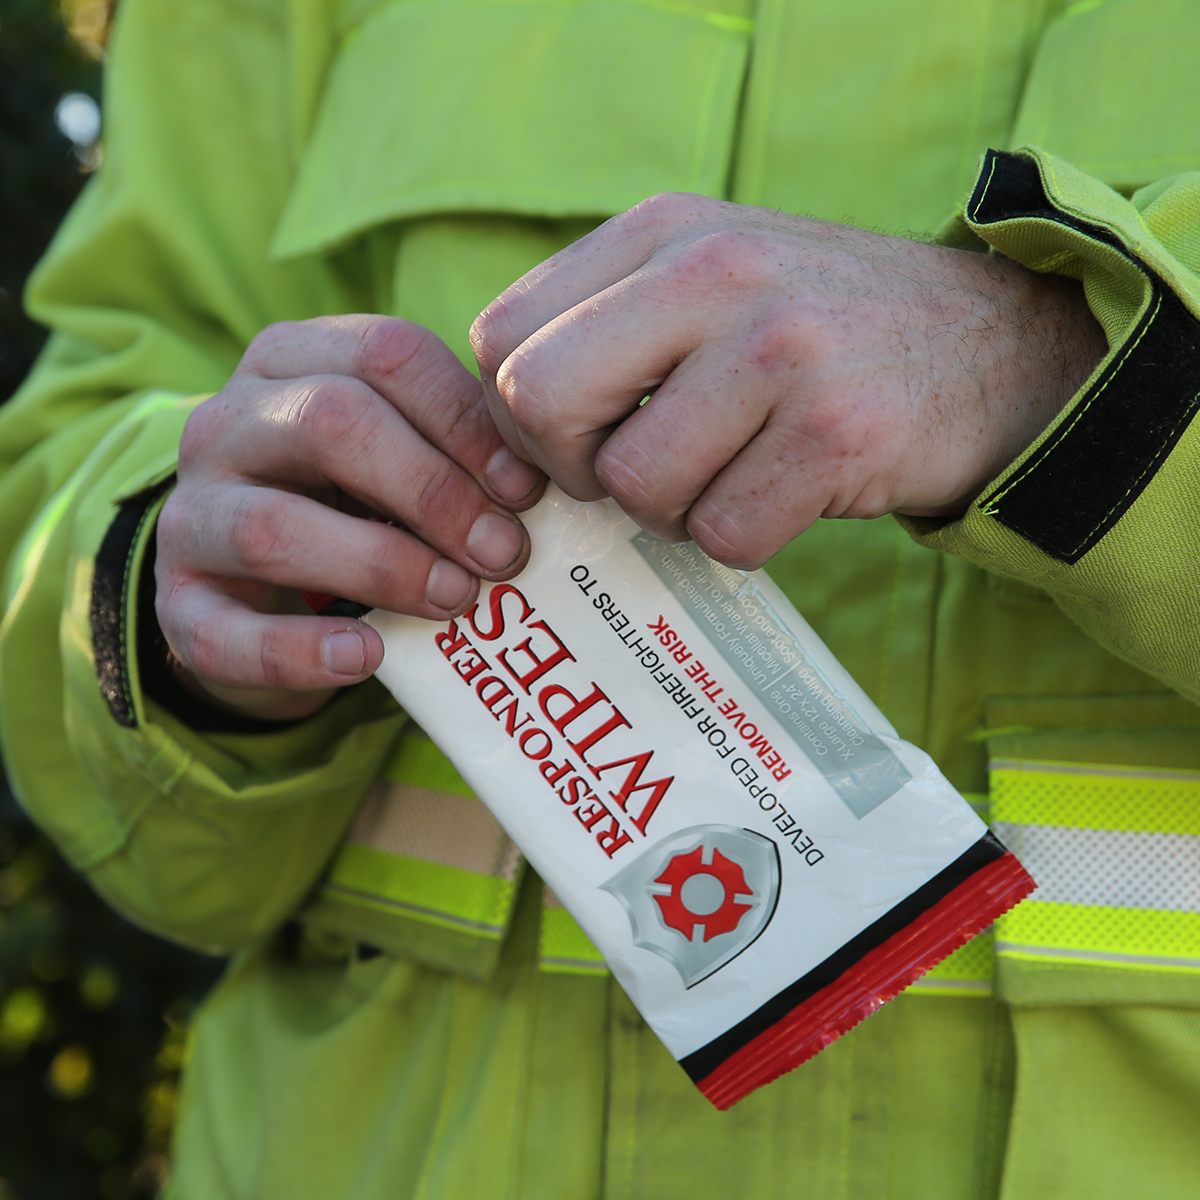 Chief's Large Responder Wipes - Healthy Firefighter Endorsed